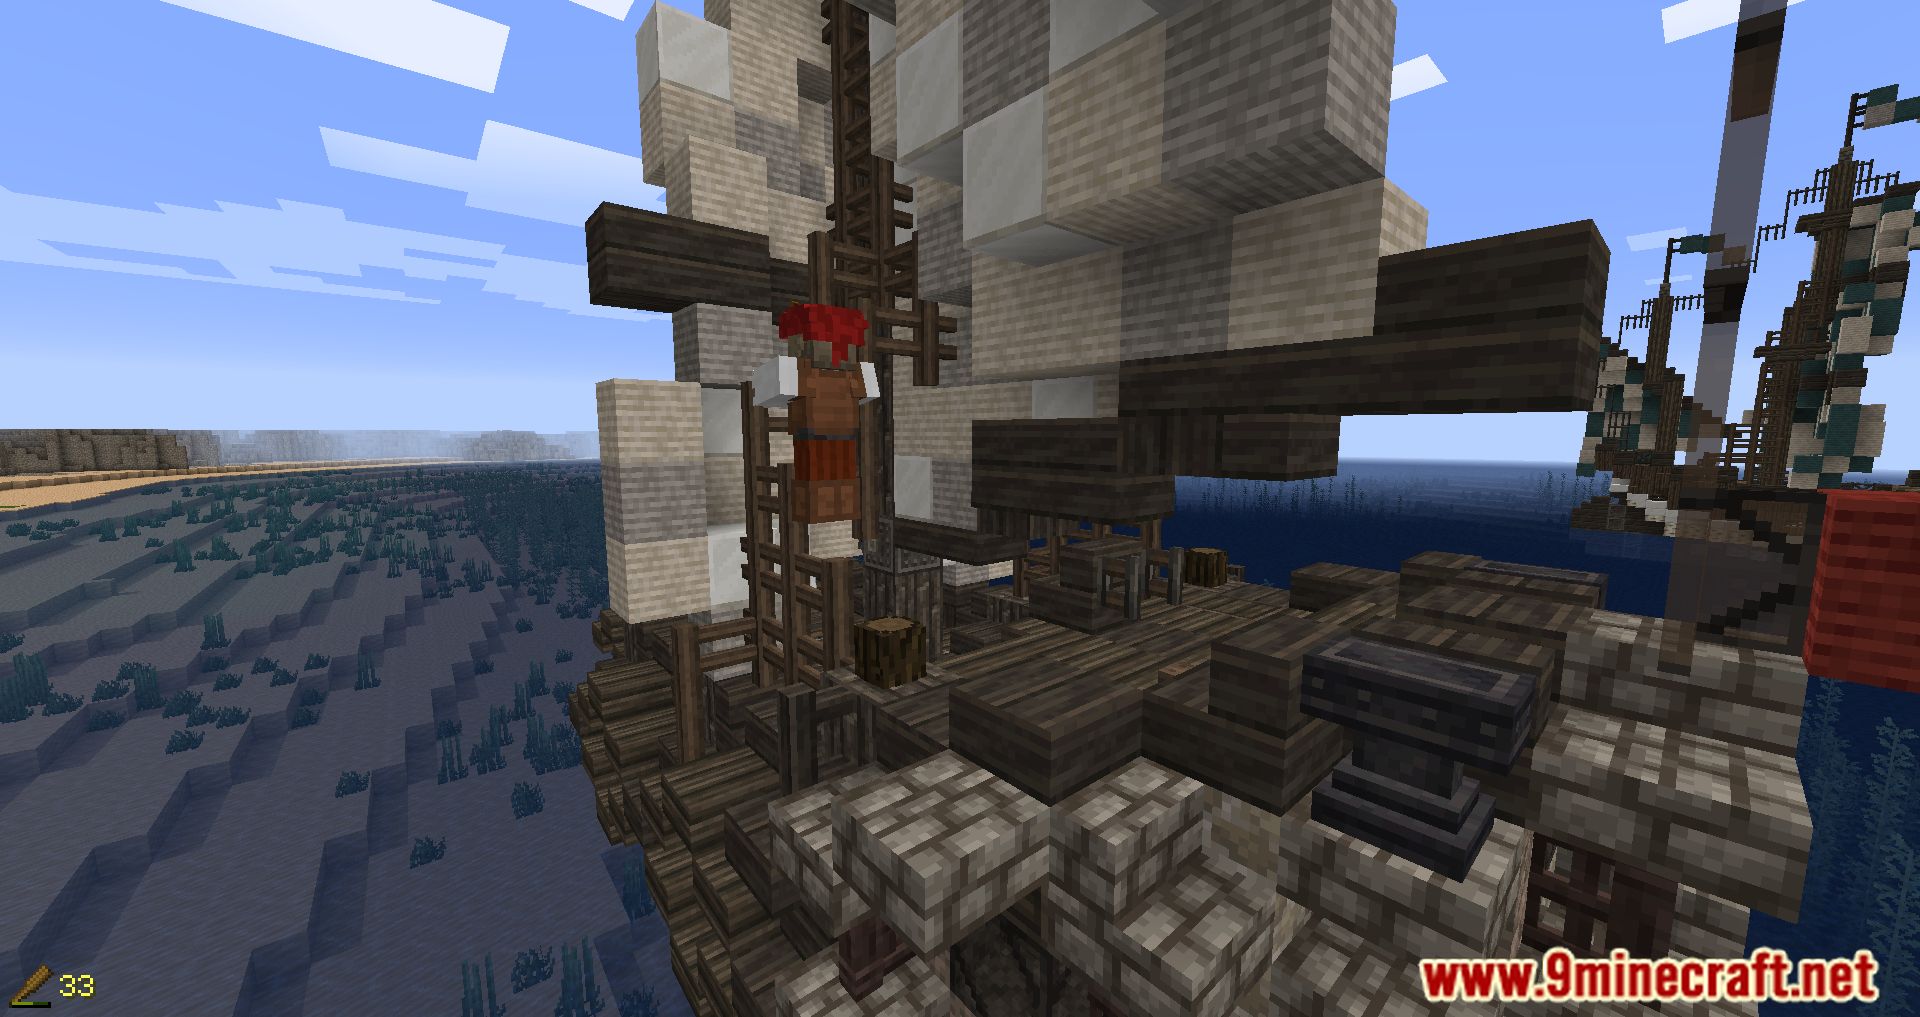 Corsair: The Seven Treasures Modpack (1.16.5) - Pirates, Riches, and Adventures 22